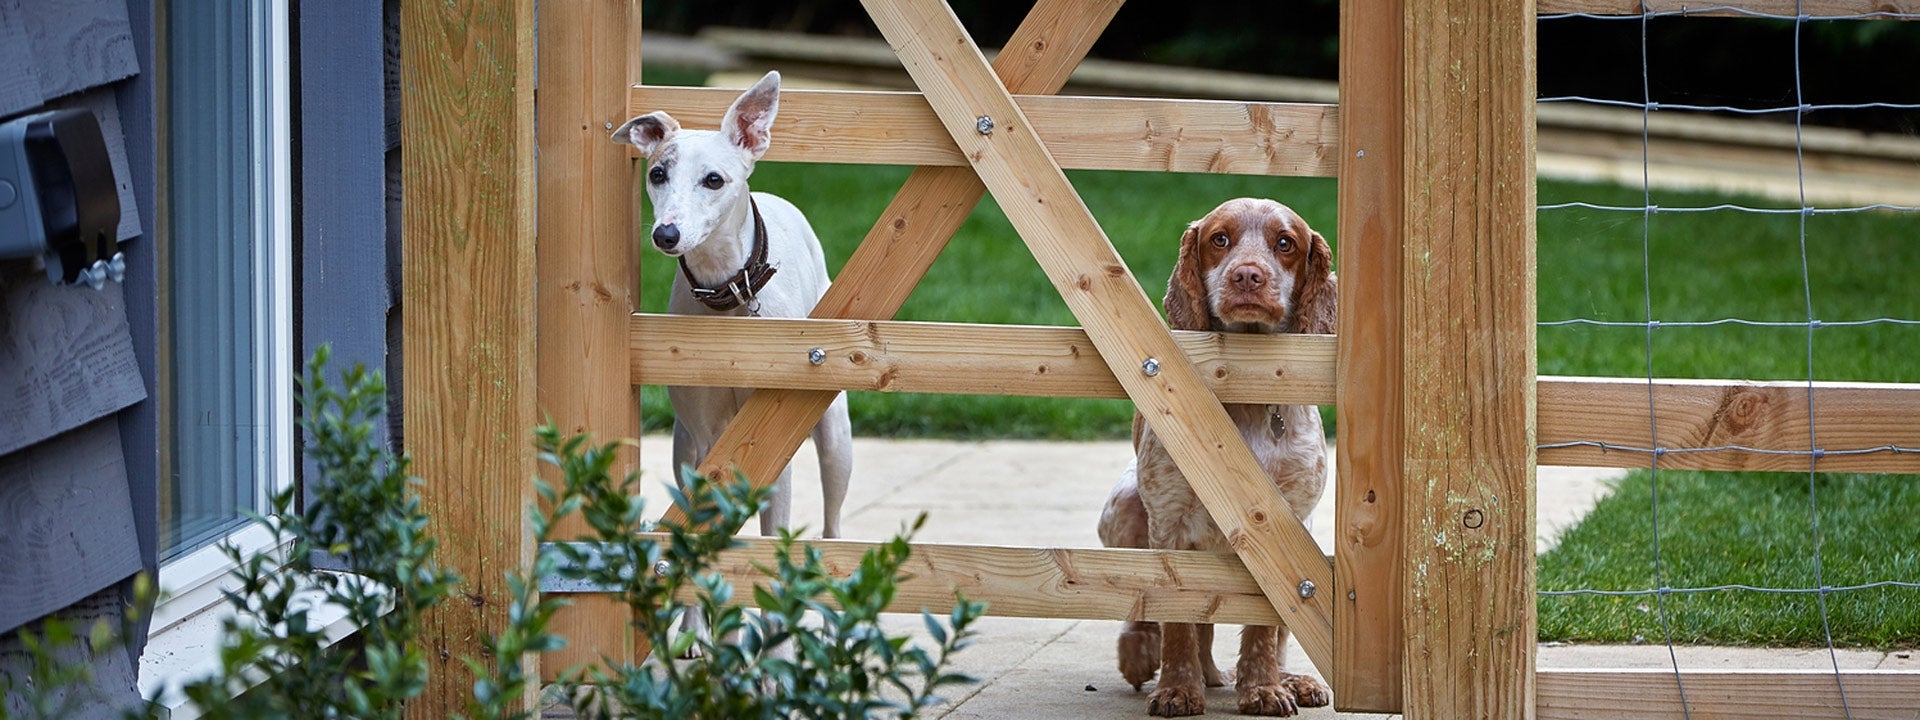 Two cute dogs peeping out of a gate, wondering if the postman is due